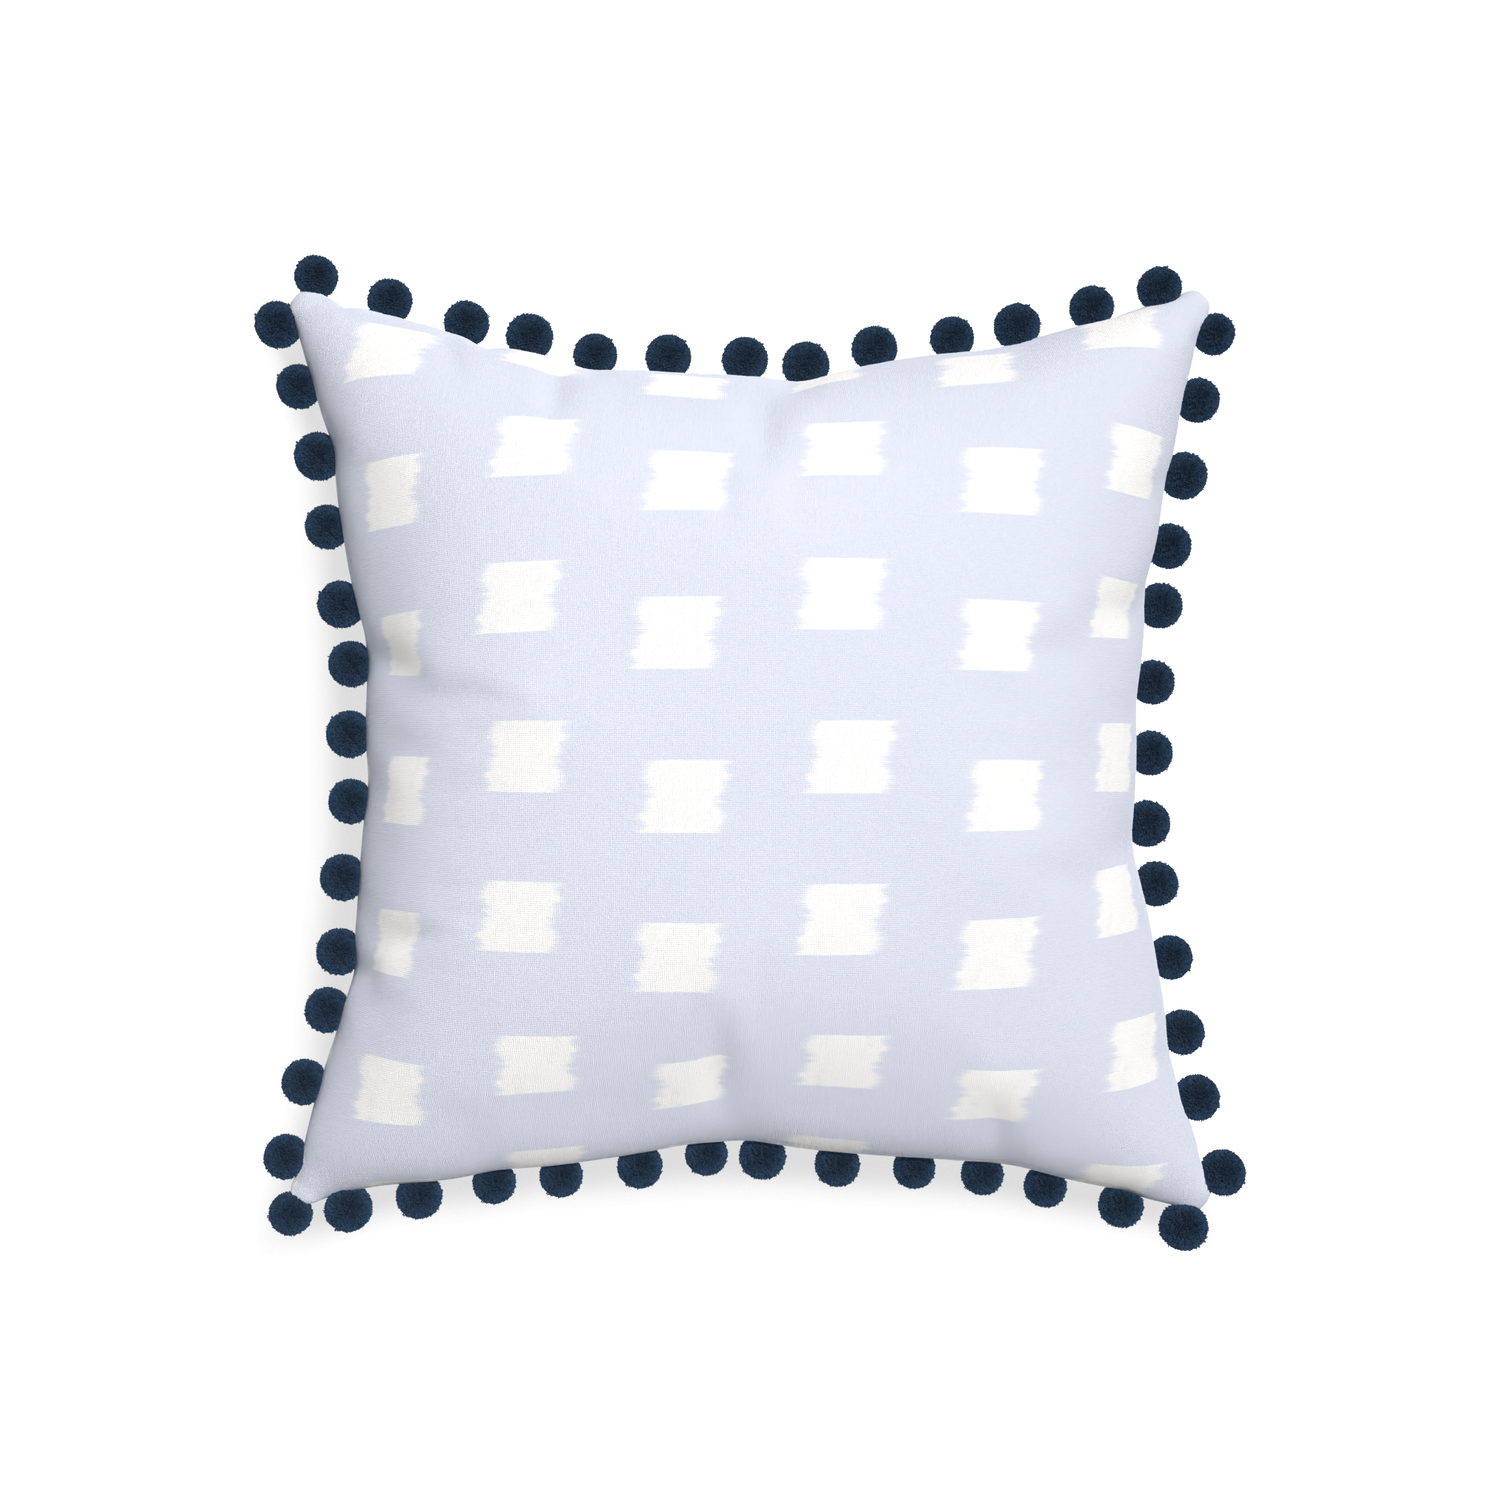 20-square denton custom sky blue patternpillow with c on white background